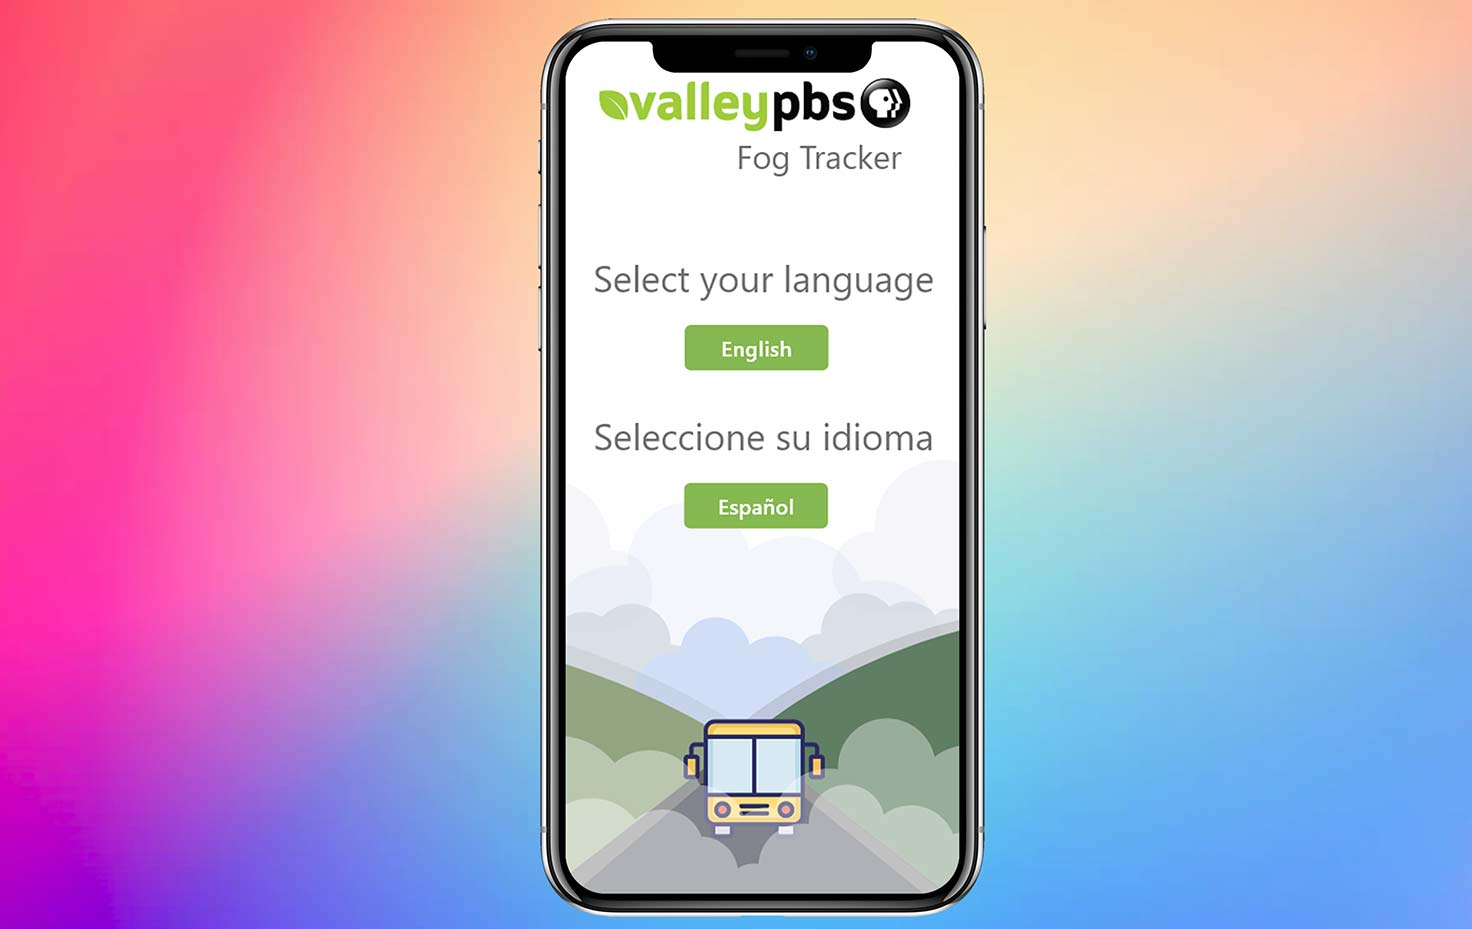 Example of language selection in the foggy day app